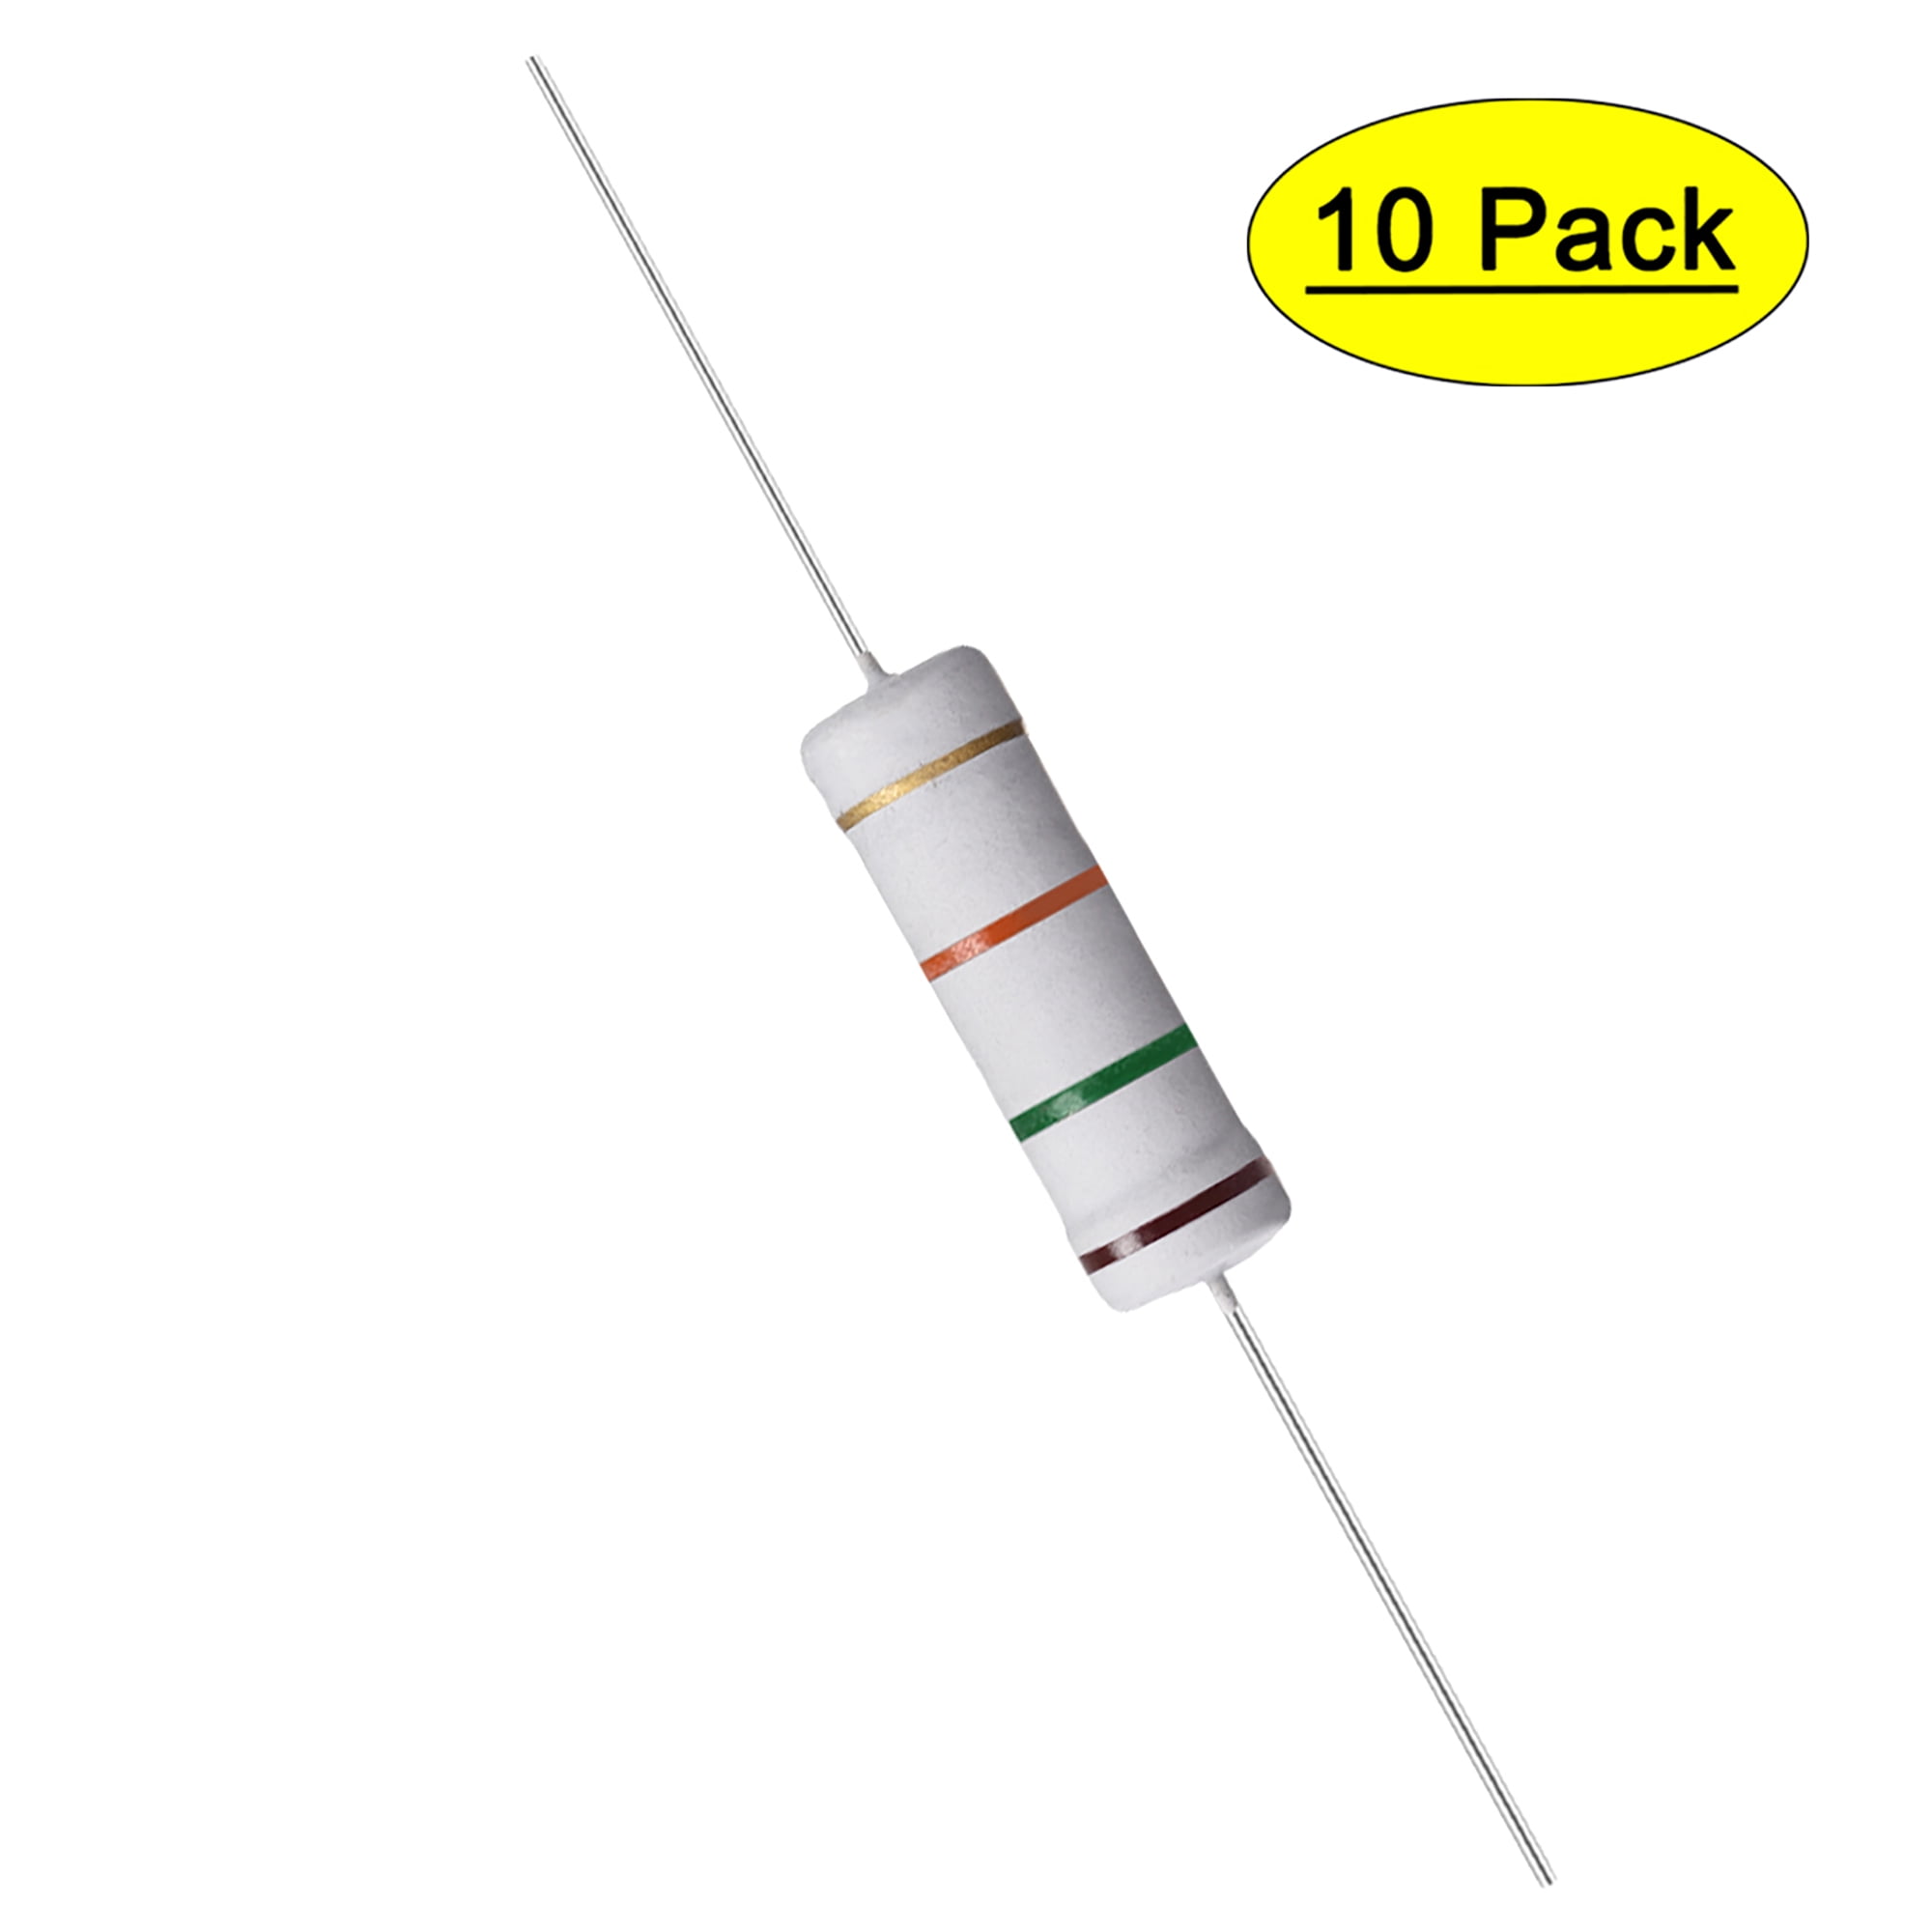 uxcell 20Pcs 820 Ohm Resistor 4 Bands for DIY Electronic Projects and Experiments 1/2W 5% Tolerance Carbon Film Resistors Axial Lead